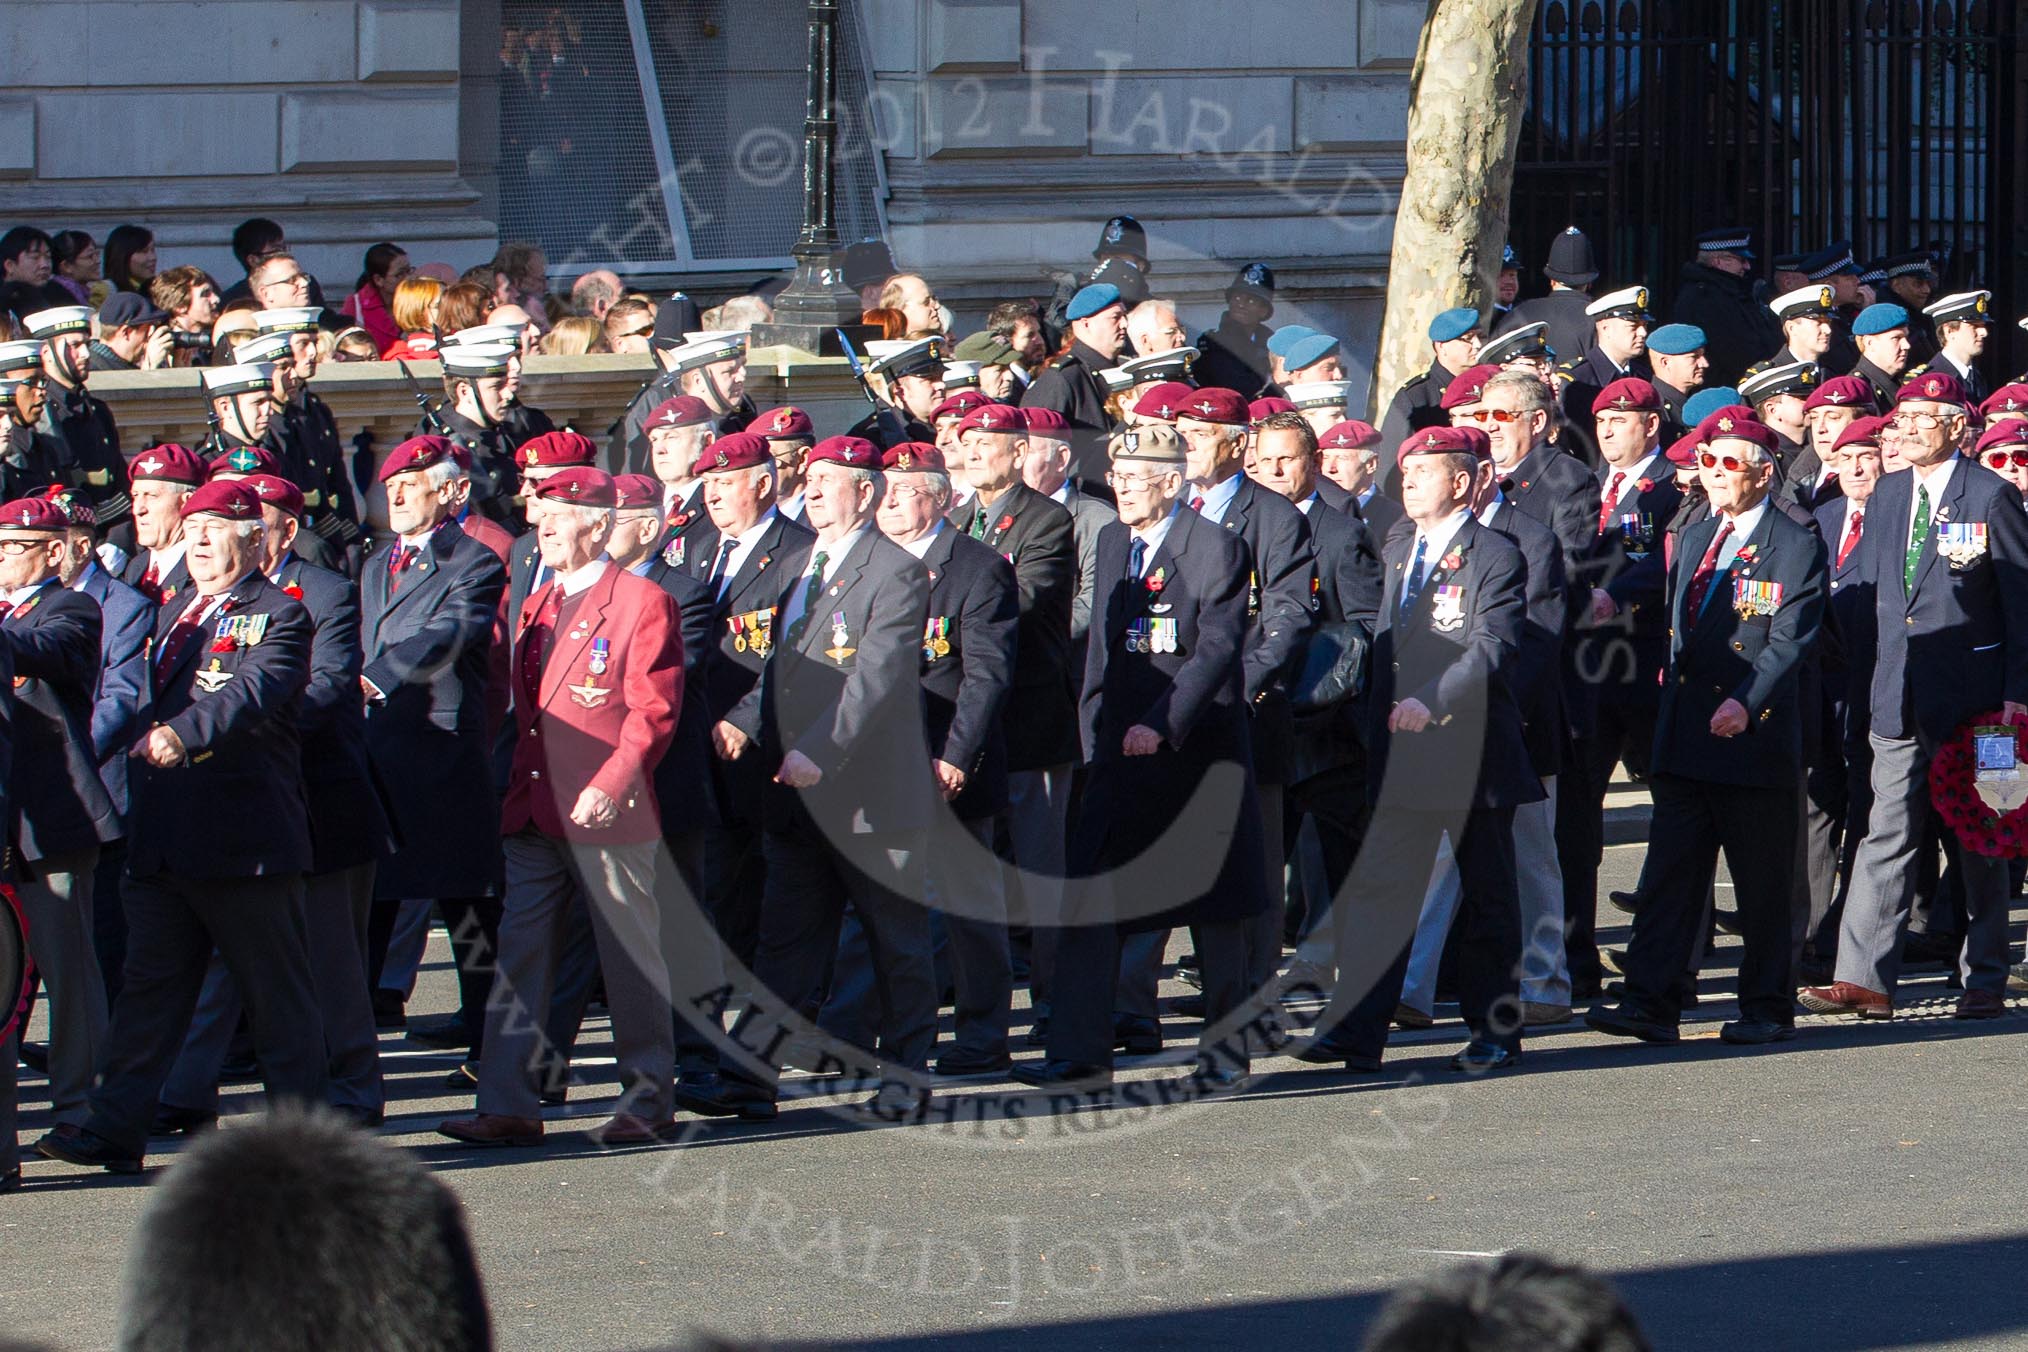 Remembrance Sunday 2012 Cenotaph March Past: Group A20 - Parachute Regimental Association..
Whitehall, Cenotaph,
London SW1,

United Kingdom,
on 11 November 2012 at 11:51, image #683